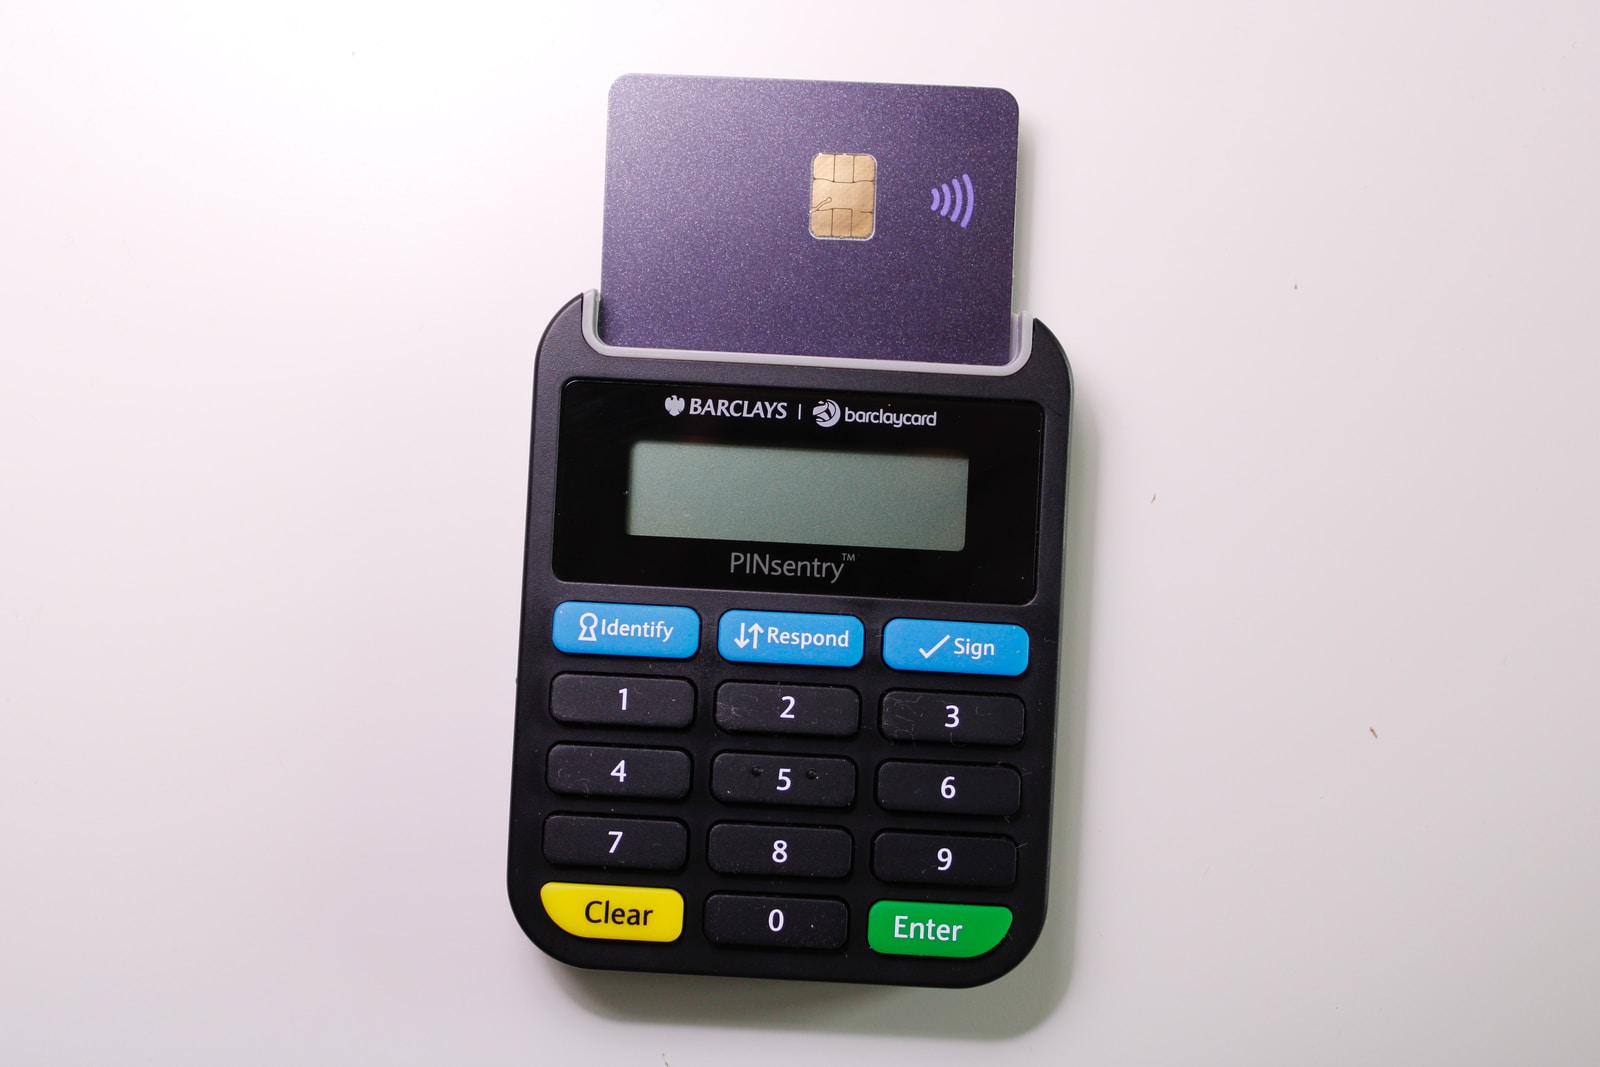 black and gray digital payment device